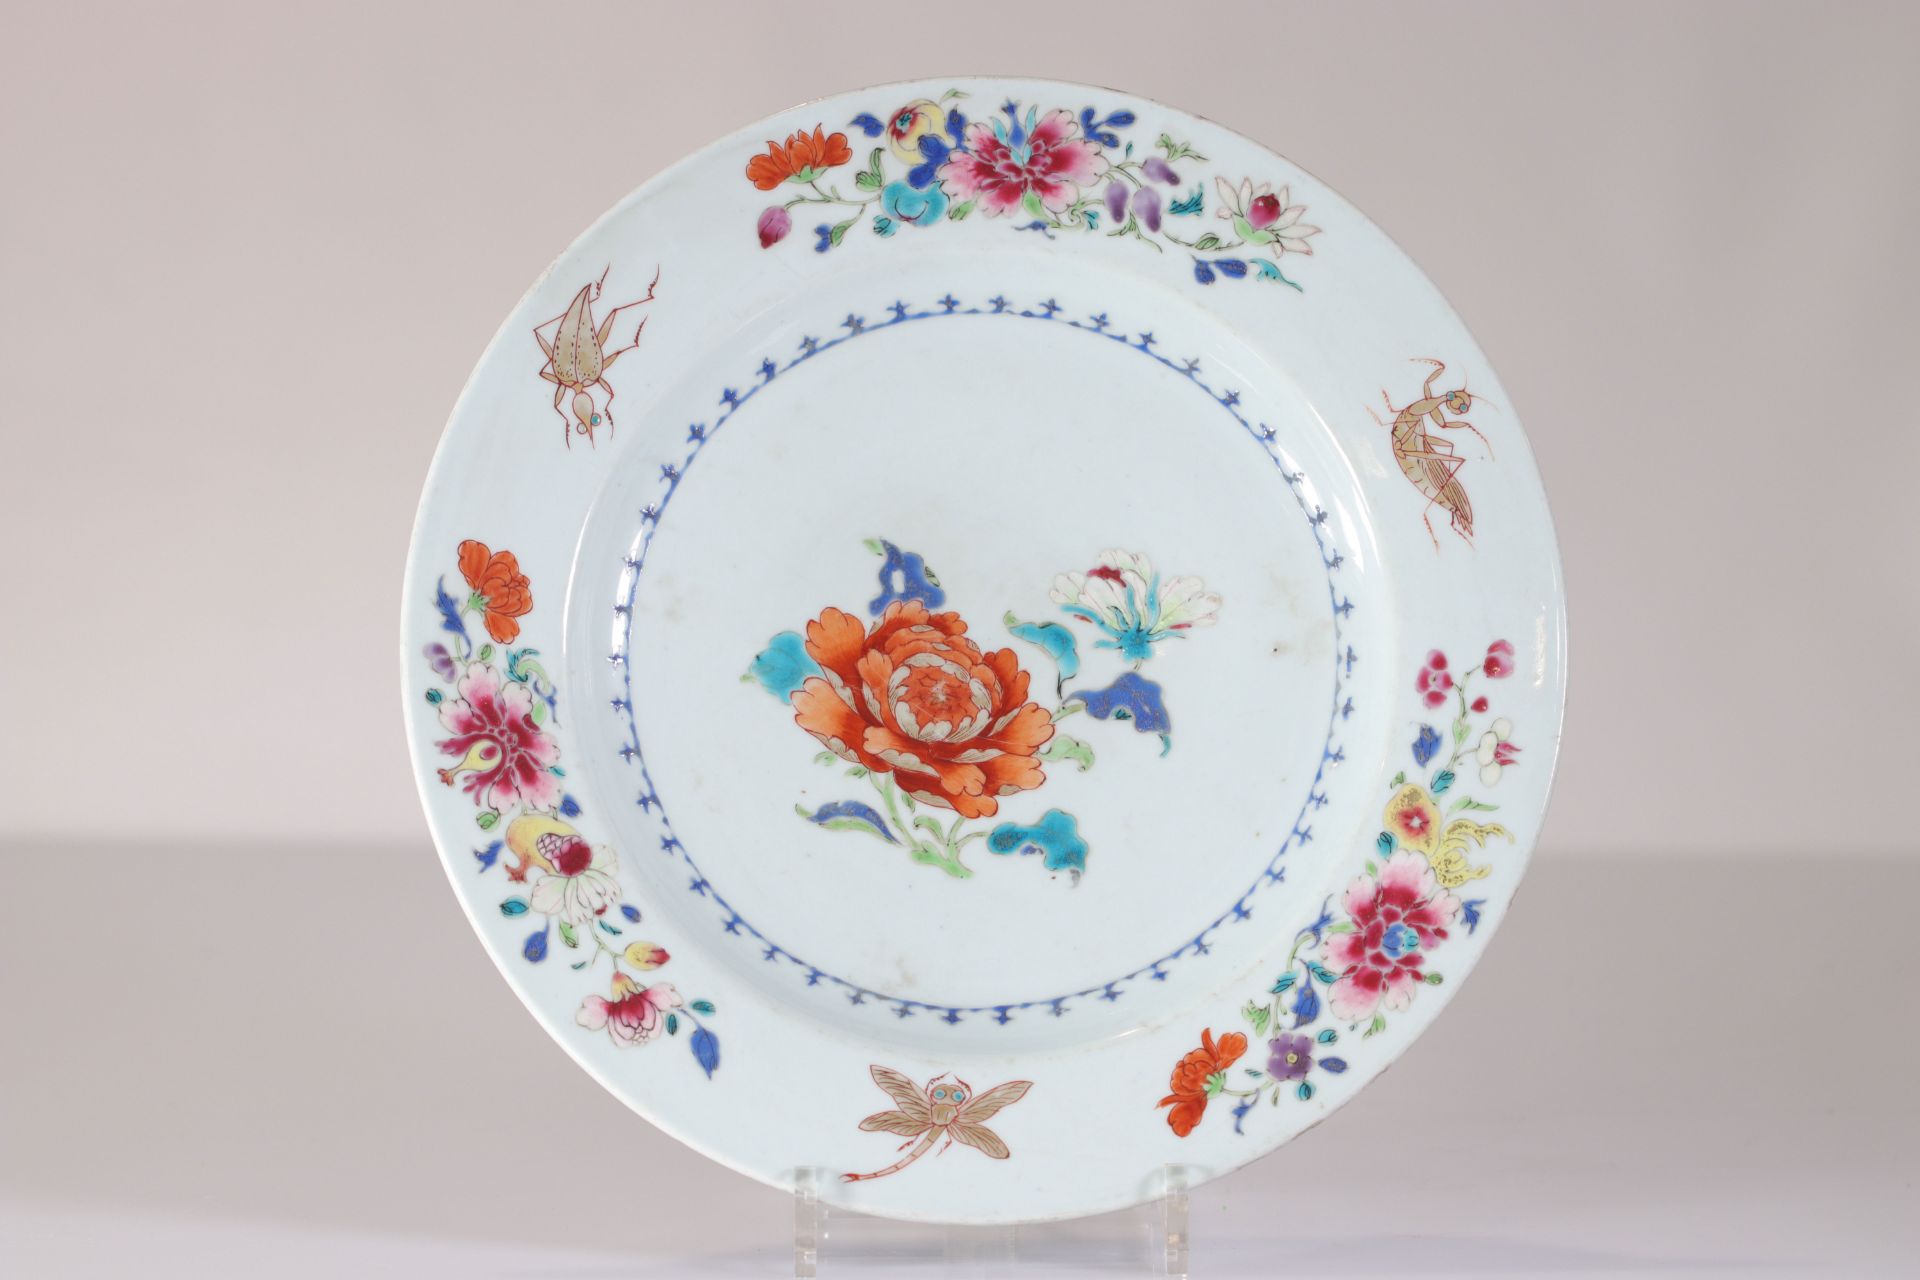 18th century famille rose plate decorated with flowers and insects